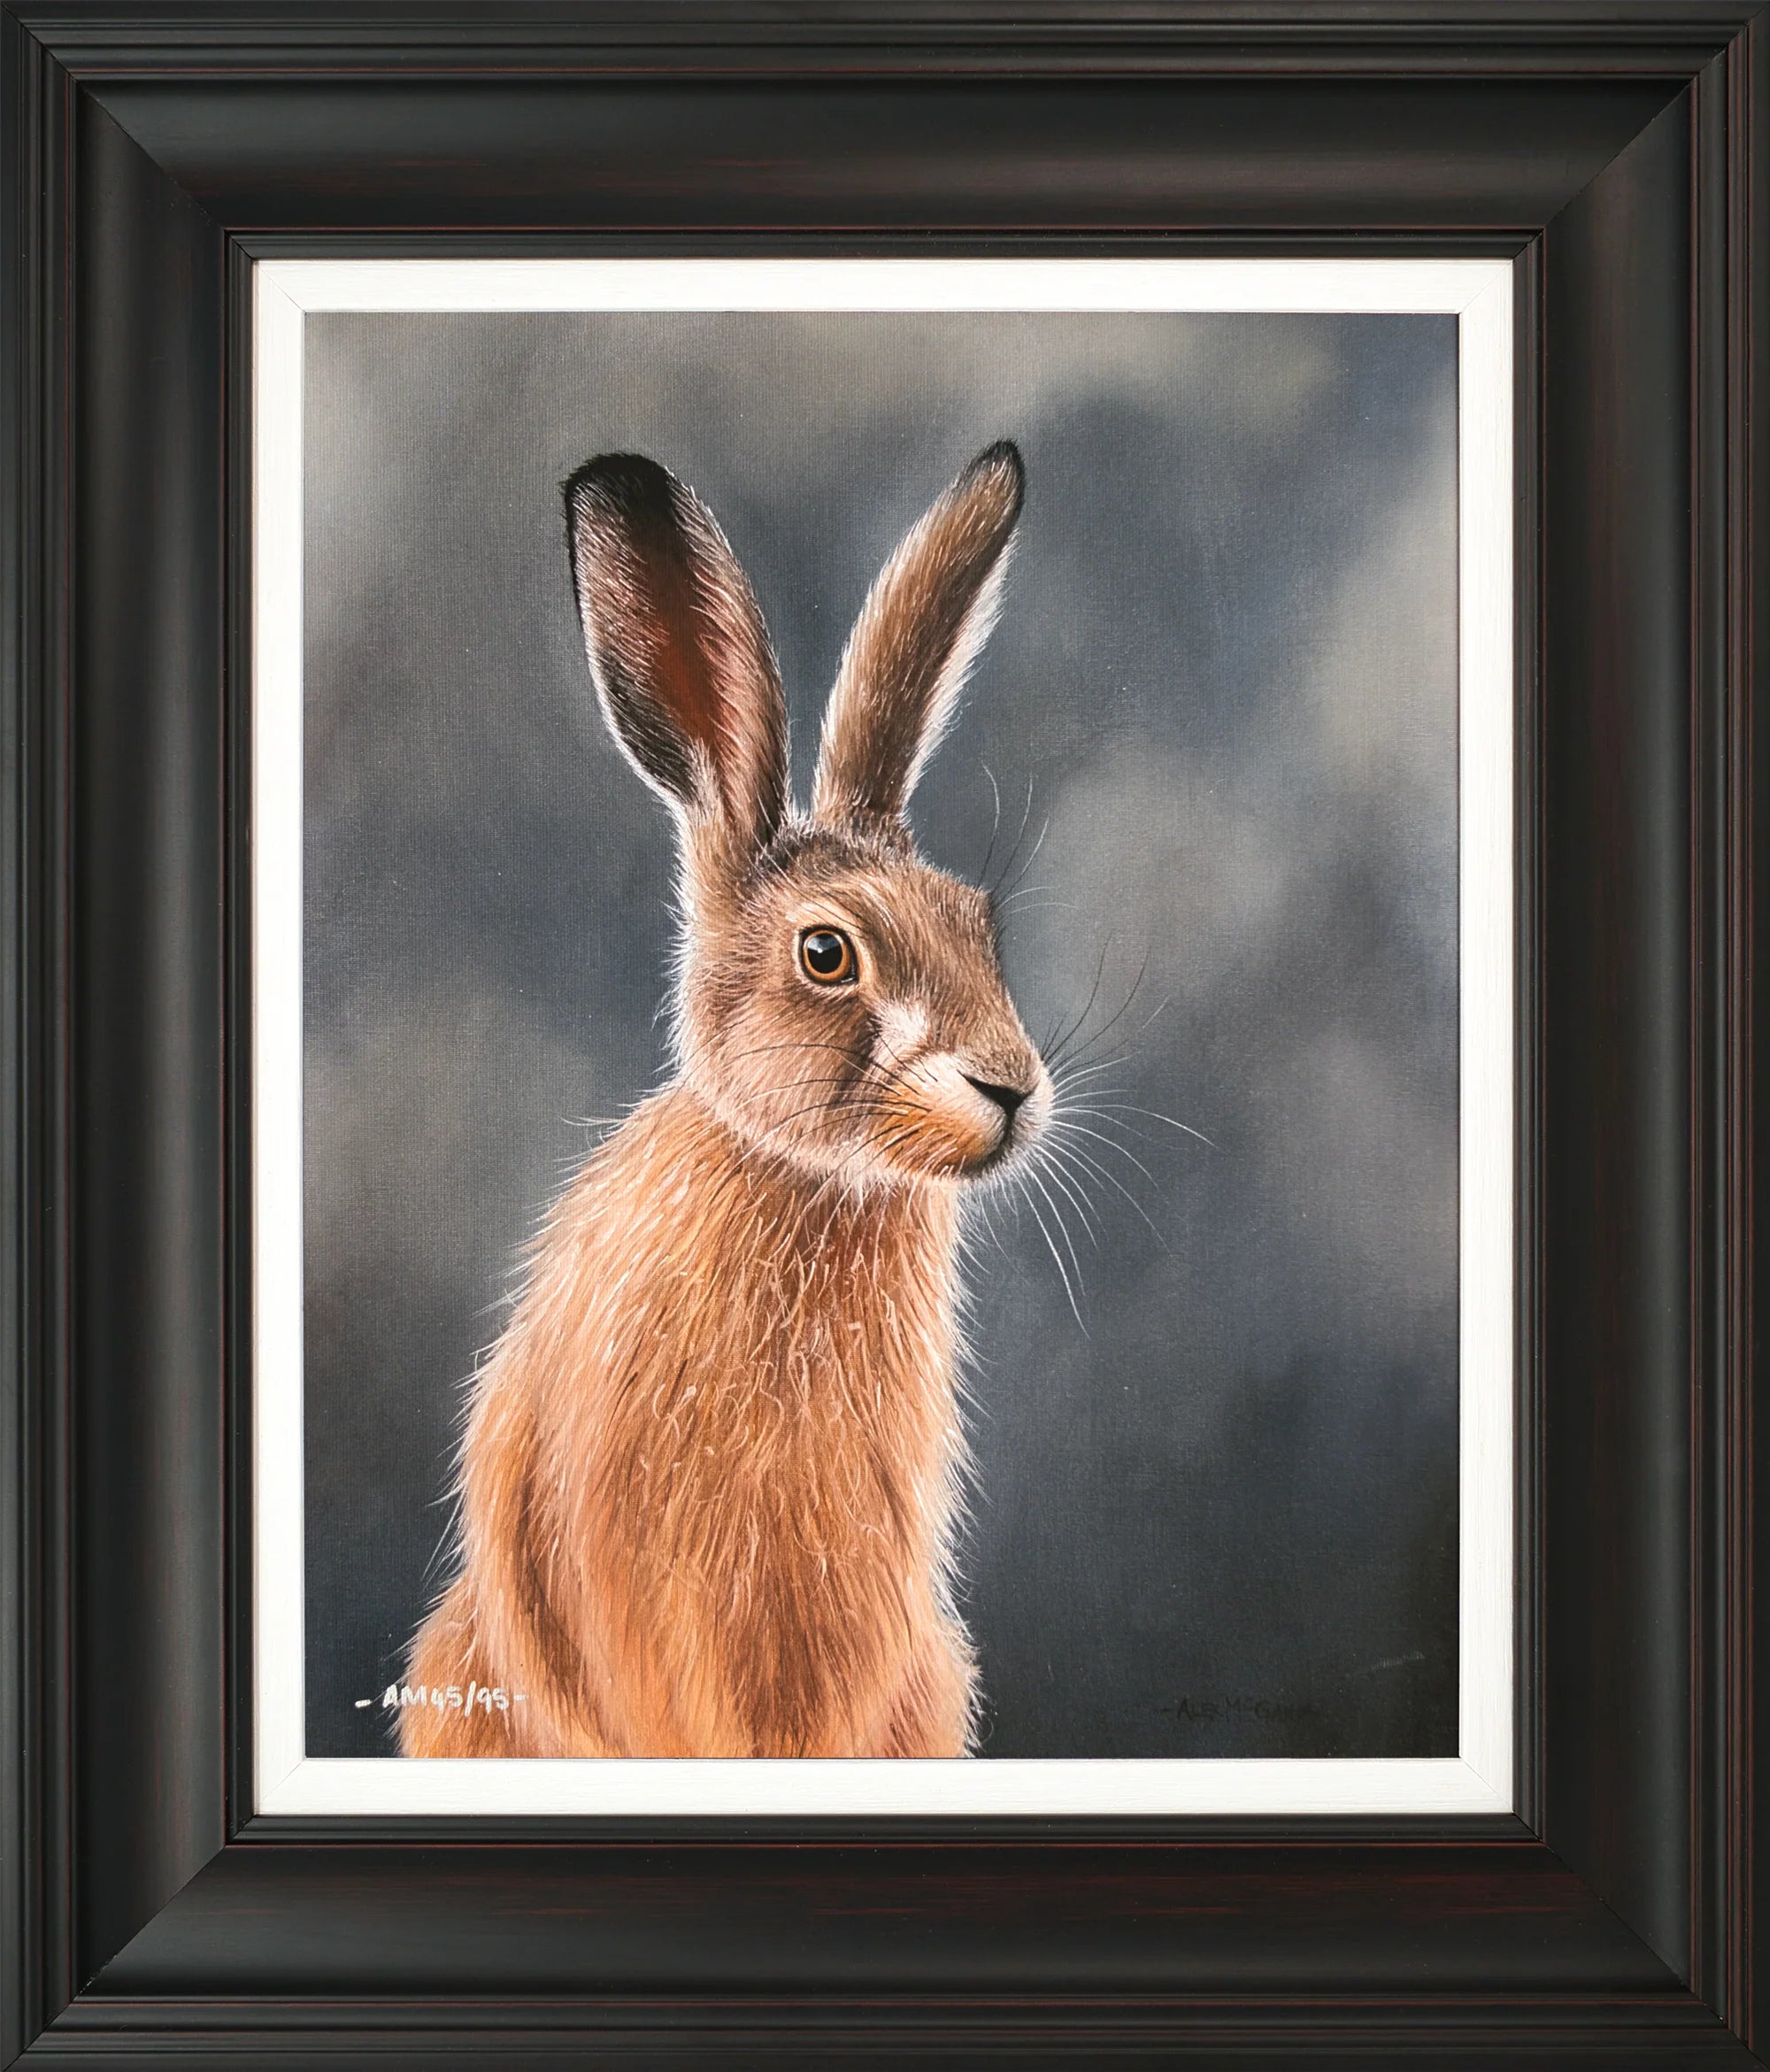 Alex McGarry - 'Hermione' - Framed Limited Edition